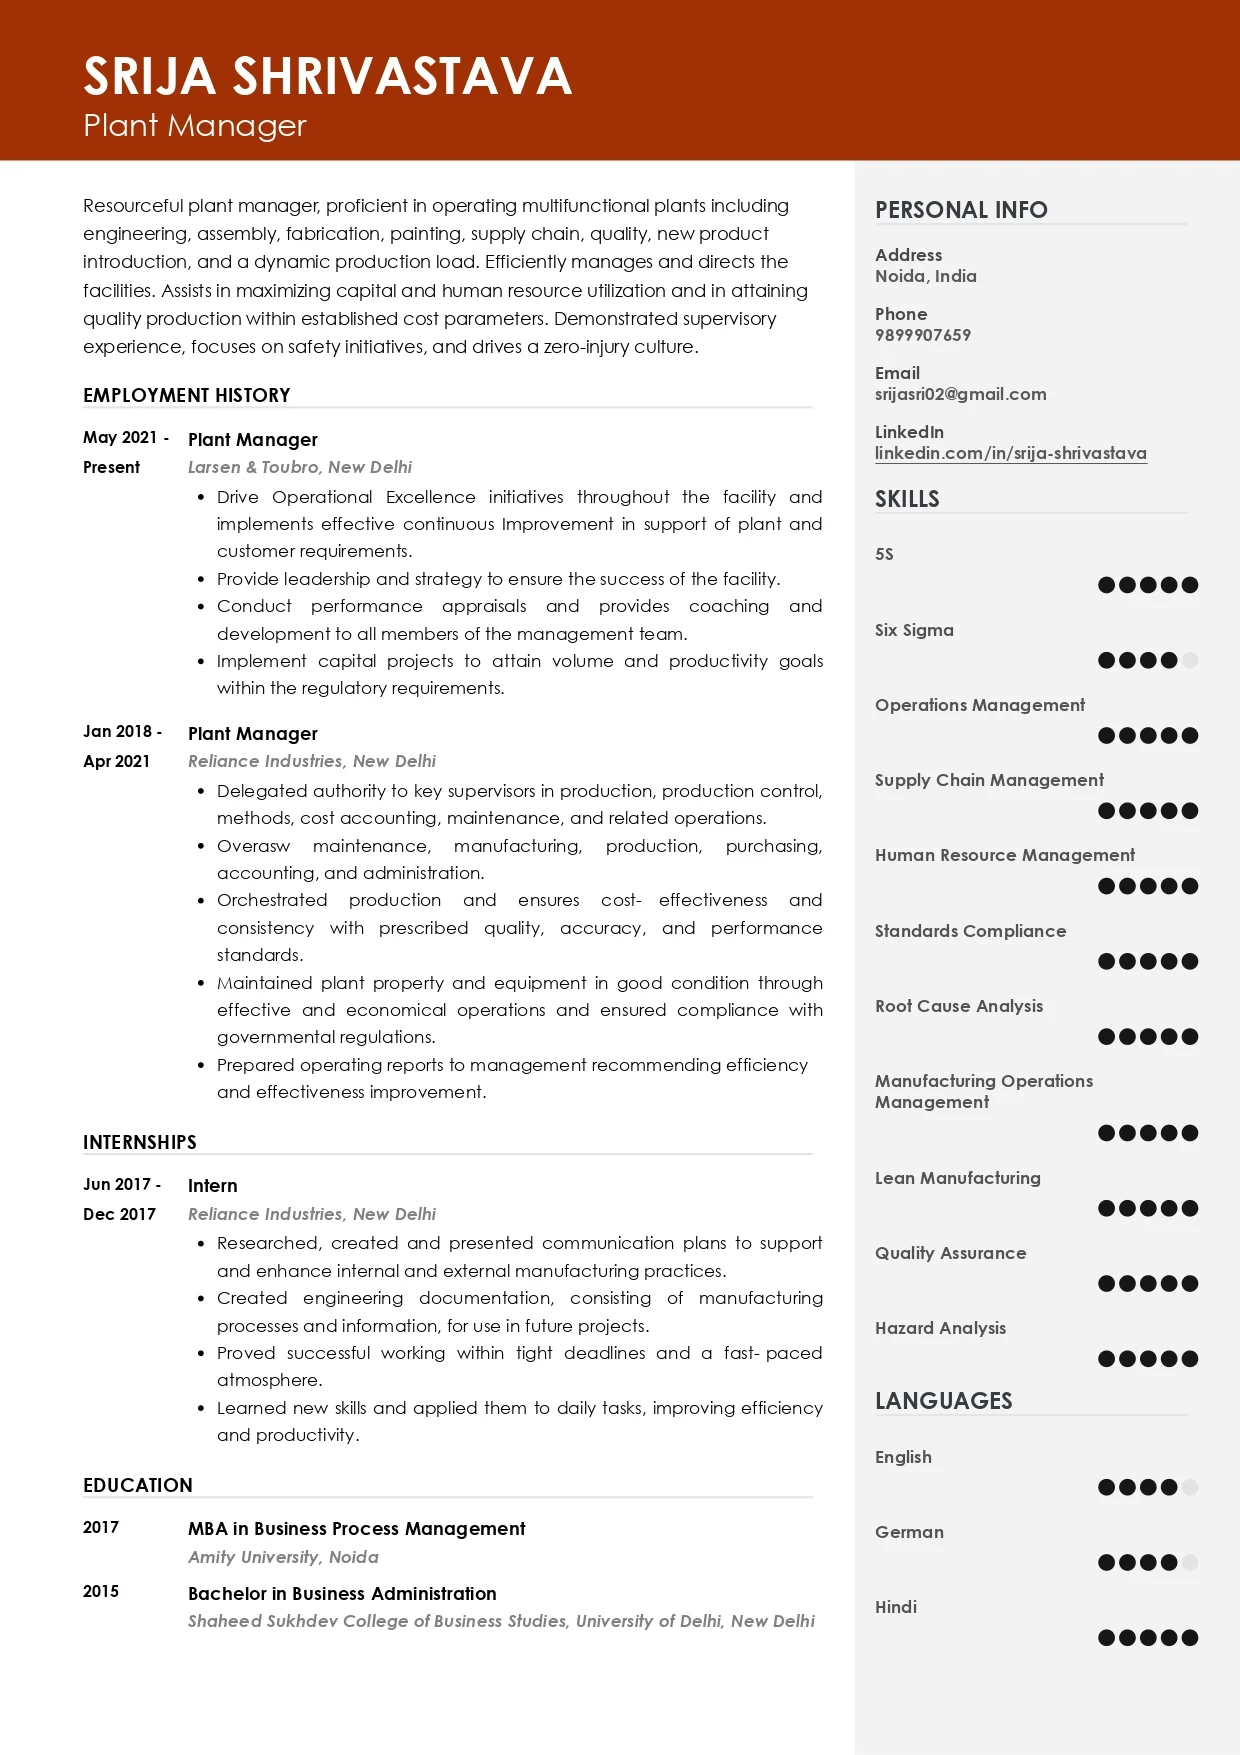 Sample Resume of Plant Manager | Free Resume Templates & Samples on Resumod.co